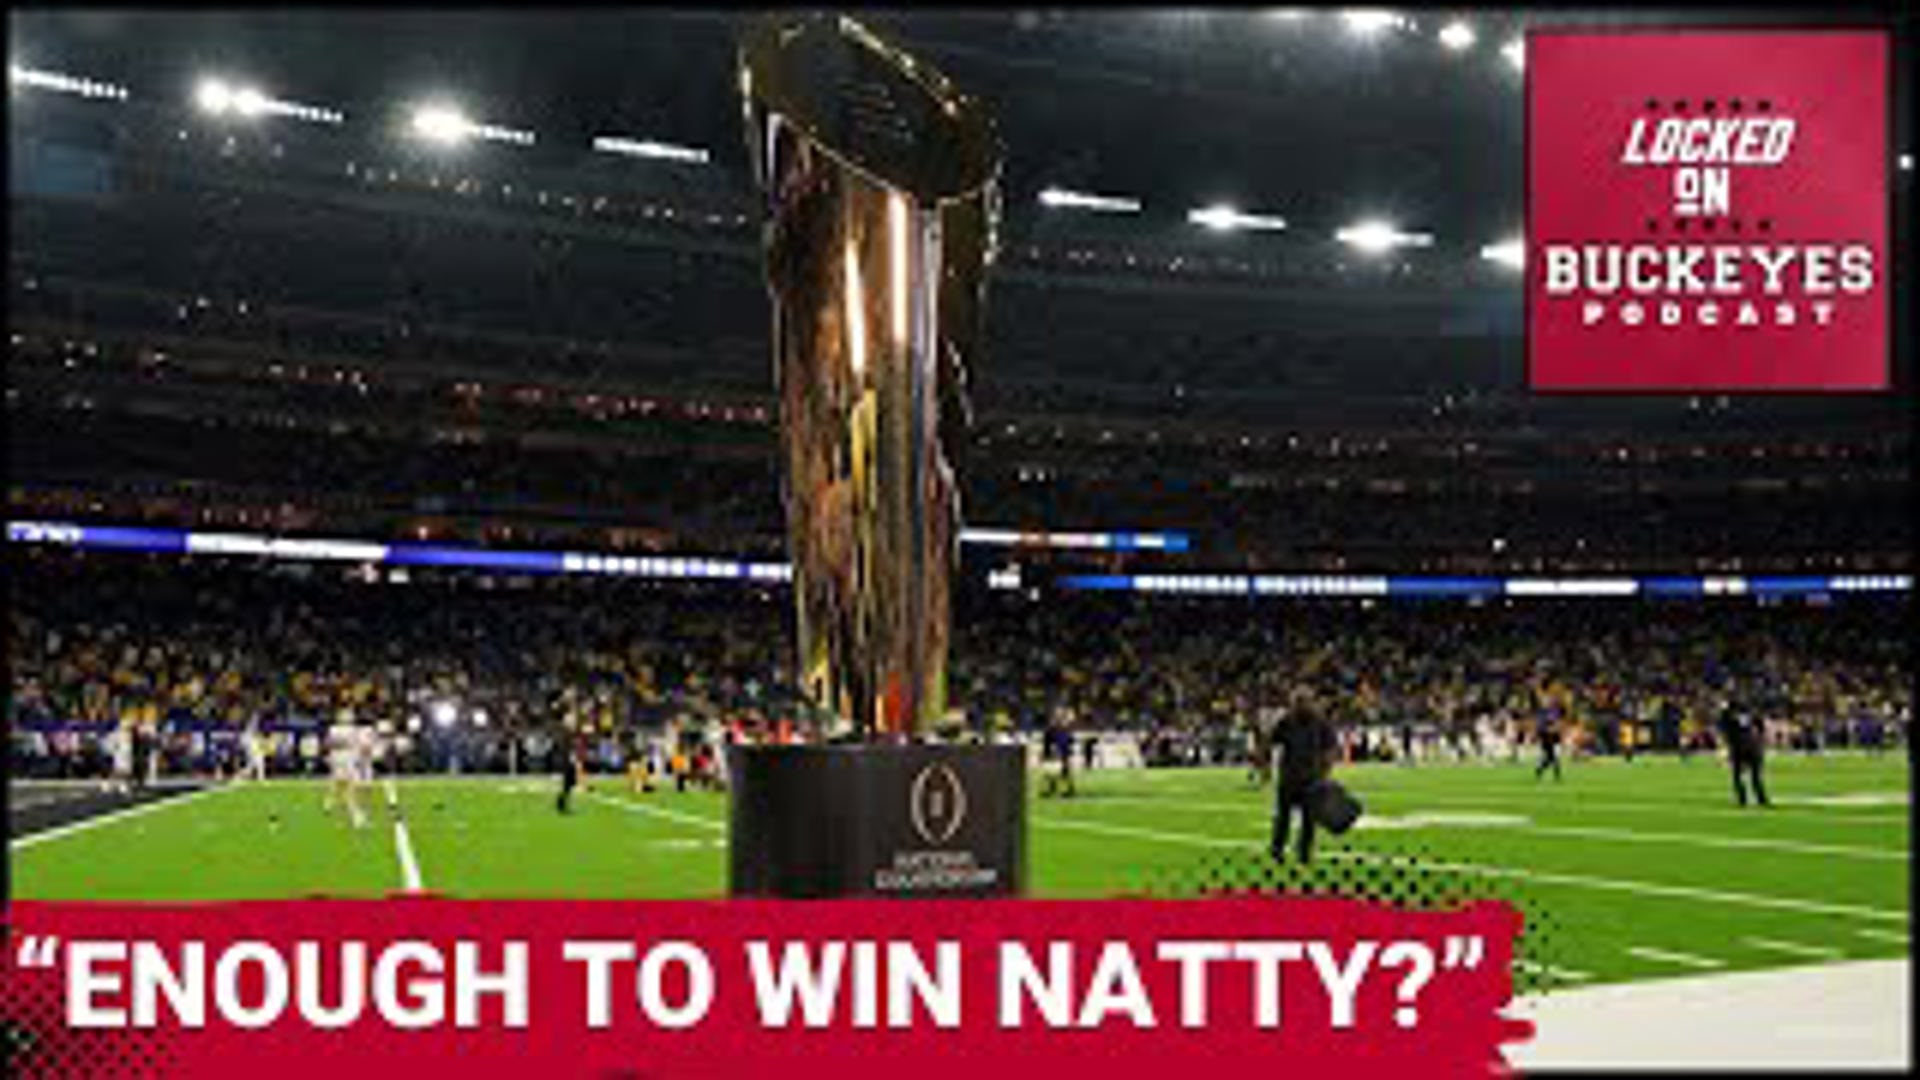 Ryan Day Believes Ohio State Has Enough to Win National Championship